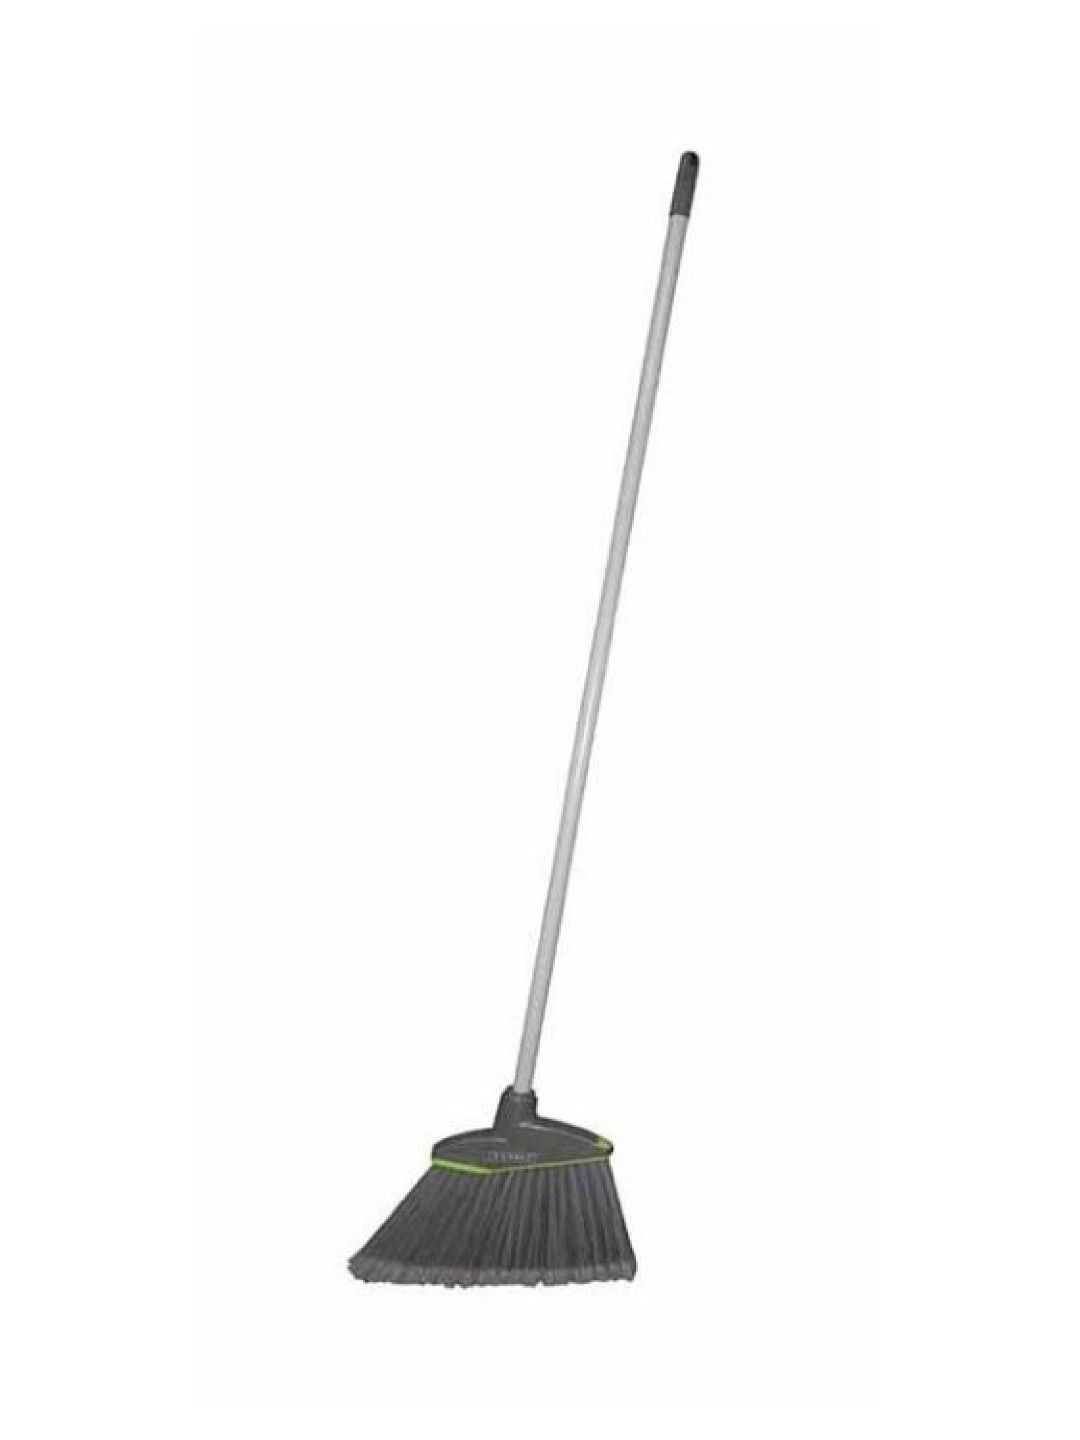 Sunbeams Lifestyle Scrubz Long Angle Broom Easy Grip Heavy Duty Cleaning Essentials